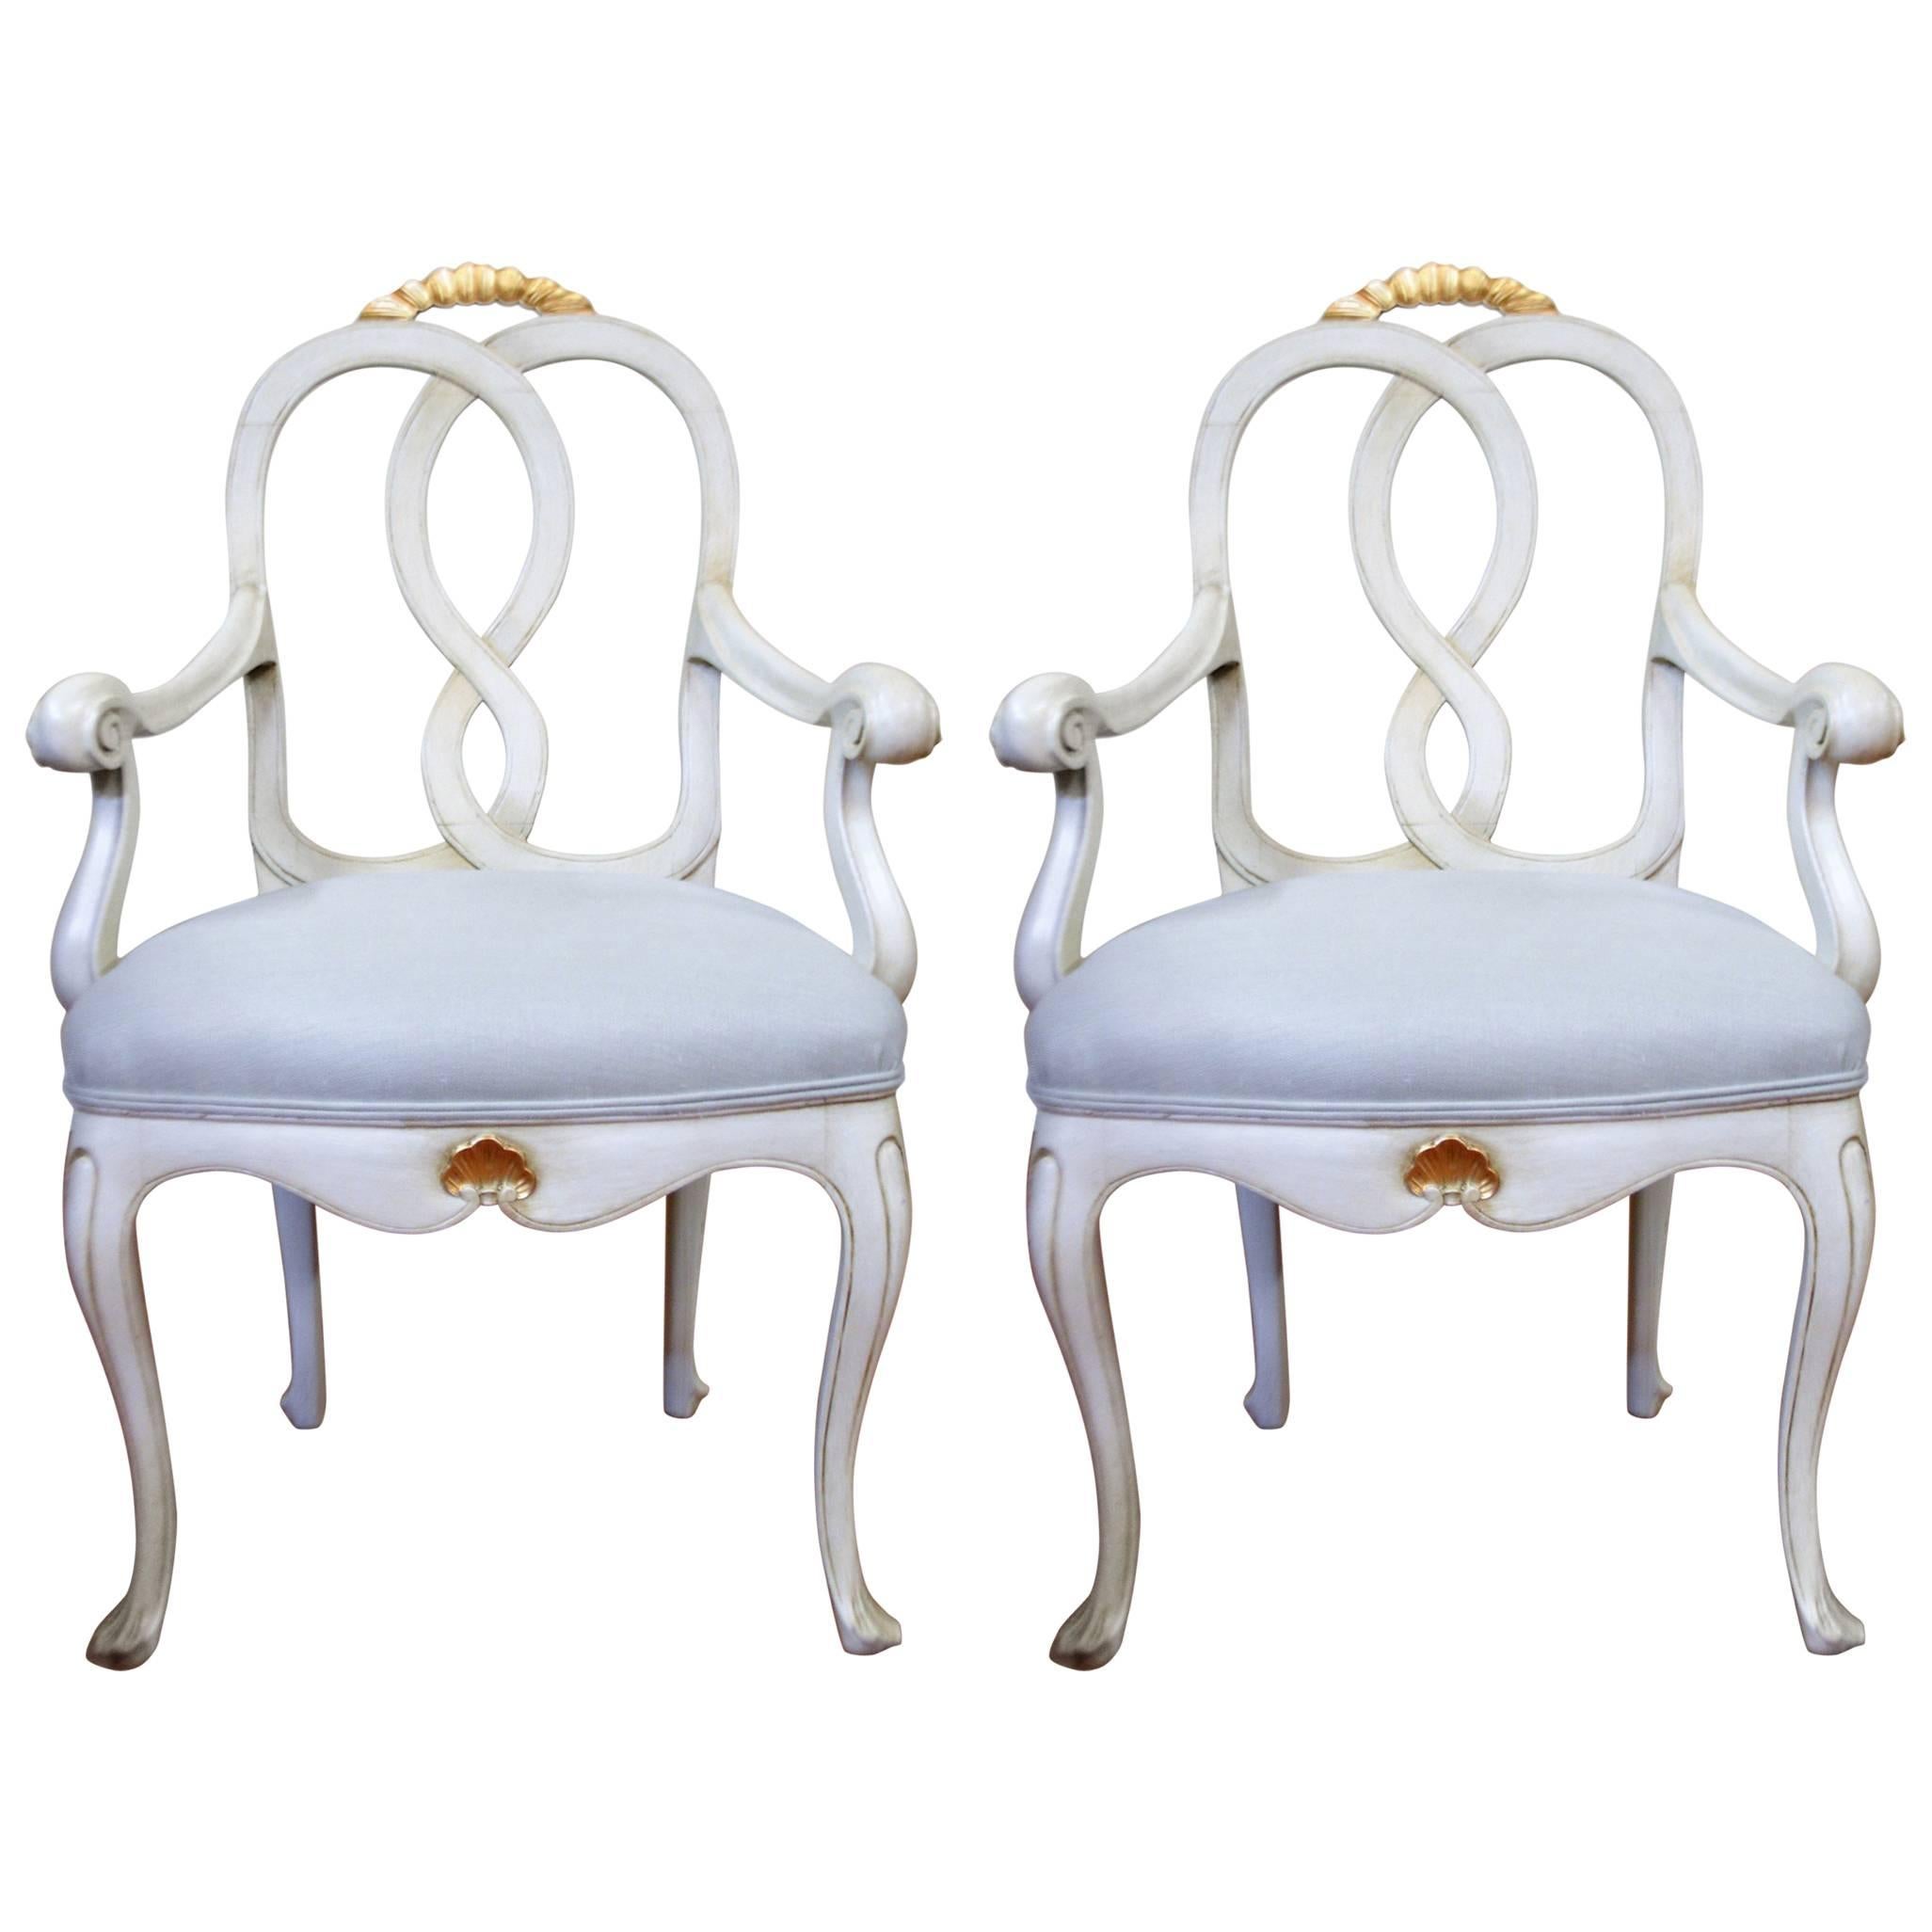 Pair of Louis XV Style Painted Armchairs Upholstered in a Belgium Linen Fabric